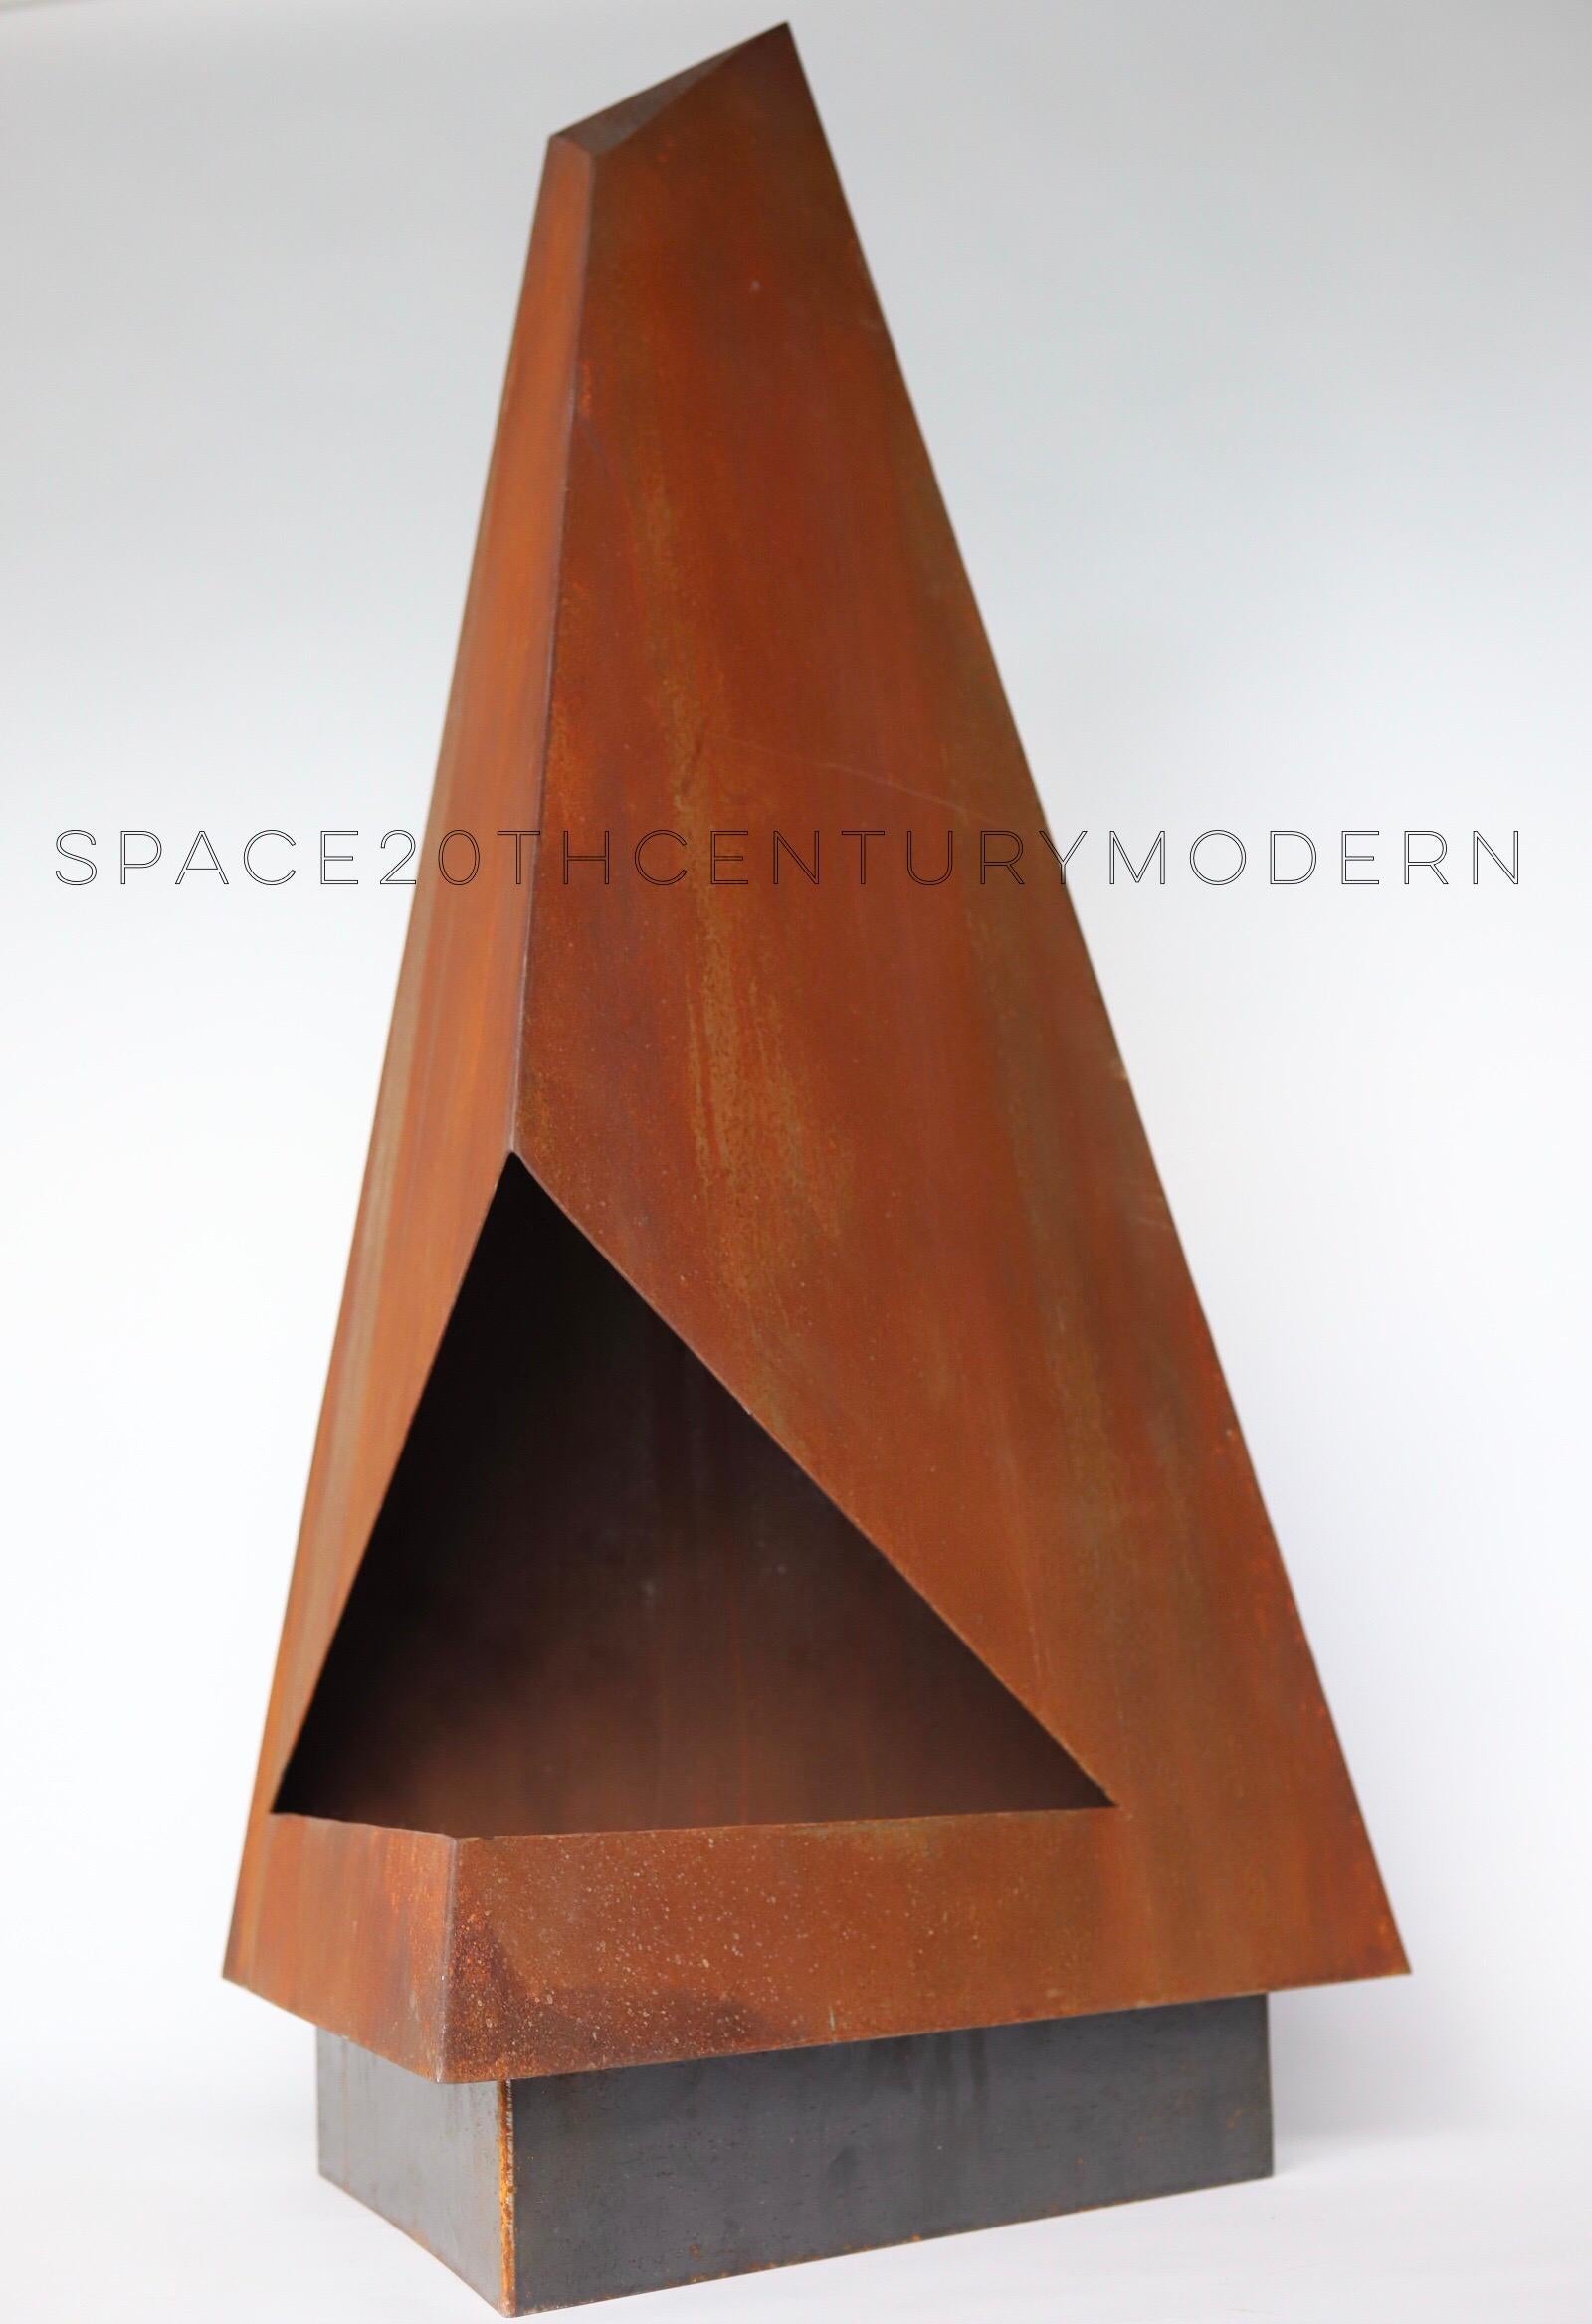 The Three by Space 20th Century Modern is not your normal chimney or fireplace. This high design, steel sculptural piece will make a statement in any outdoor space. Functionally, it is perfect on that cold evening, but also serves as an amazing art